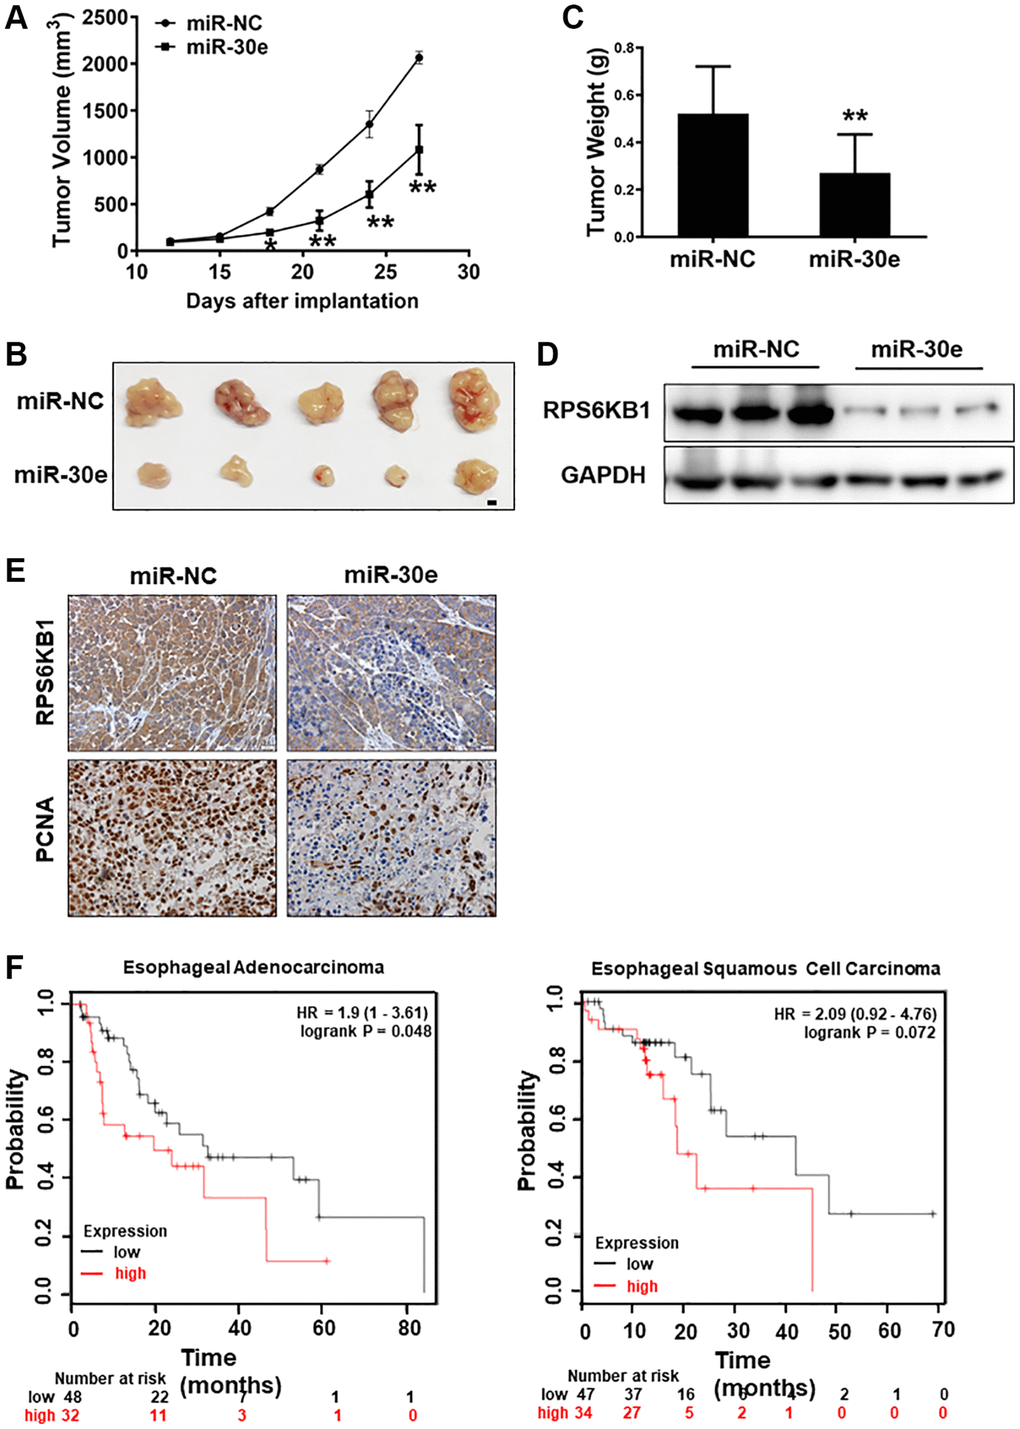 MiR-30e inhibited tumor growth and RPS6KB1 expression, and higher levels of RPS6KB1 were associated with lower esophageal cancer survival rate. (A) Kyse30 cells were infected with lentivirus expressing miR-30e or miR-NC, and cells stably expressing miR-NC and miR-30e termed as Kyse30/miR-NC and Kyse30/miR-30e were obtained after puromycin selection. Cells (5 × 106 cells) in 100 μl of serum-free DMEM medium were subcutaneously injected into posterior flanks on both sides of the nude mice (n = 5). Tumors were measured every three days after they were visible starting on Day 12. Tumor volumes were calculated using the following formula: volume = 0.5 × (length × width2). (B) Representative pictures of tumors. Bar = 2 mm. (C) The weights of tumors from miR-30e and miR-NC groups were measured. (D) The total proteins were extracted from xenografts and subjected to Western blotting analysis to test levels of RPS6KB1. GAPDH levels were used as an internal control. (E) The expression levels of RPS6KB1 and PCNA in tumor tissues were analyzed by immunohistochemical (IHC) staining. (F) The Kaplan Meier plotter was used to detect the correlation between overall survival (OS) and RPS6KB1 expression levels in esophageal adenocarcinoma and esophageal squamous cell carcinoma tissues, respectively. Data represent mean ±SD of 3 replicates. *,**indicates significant difference at P P 